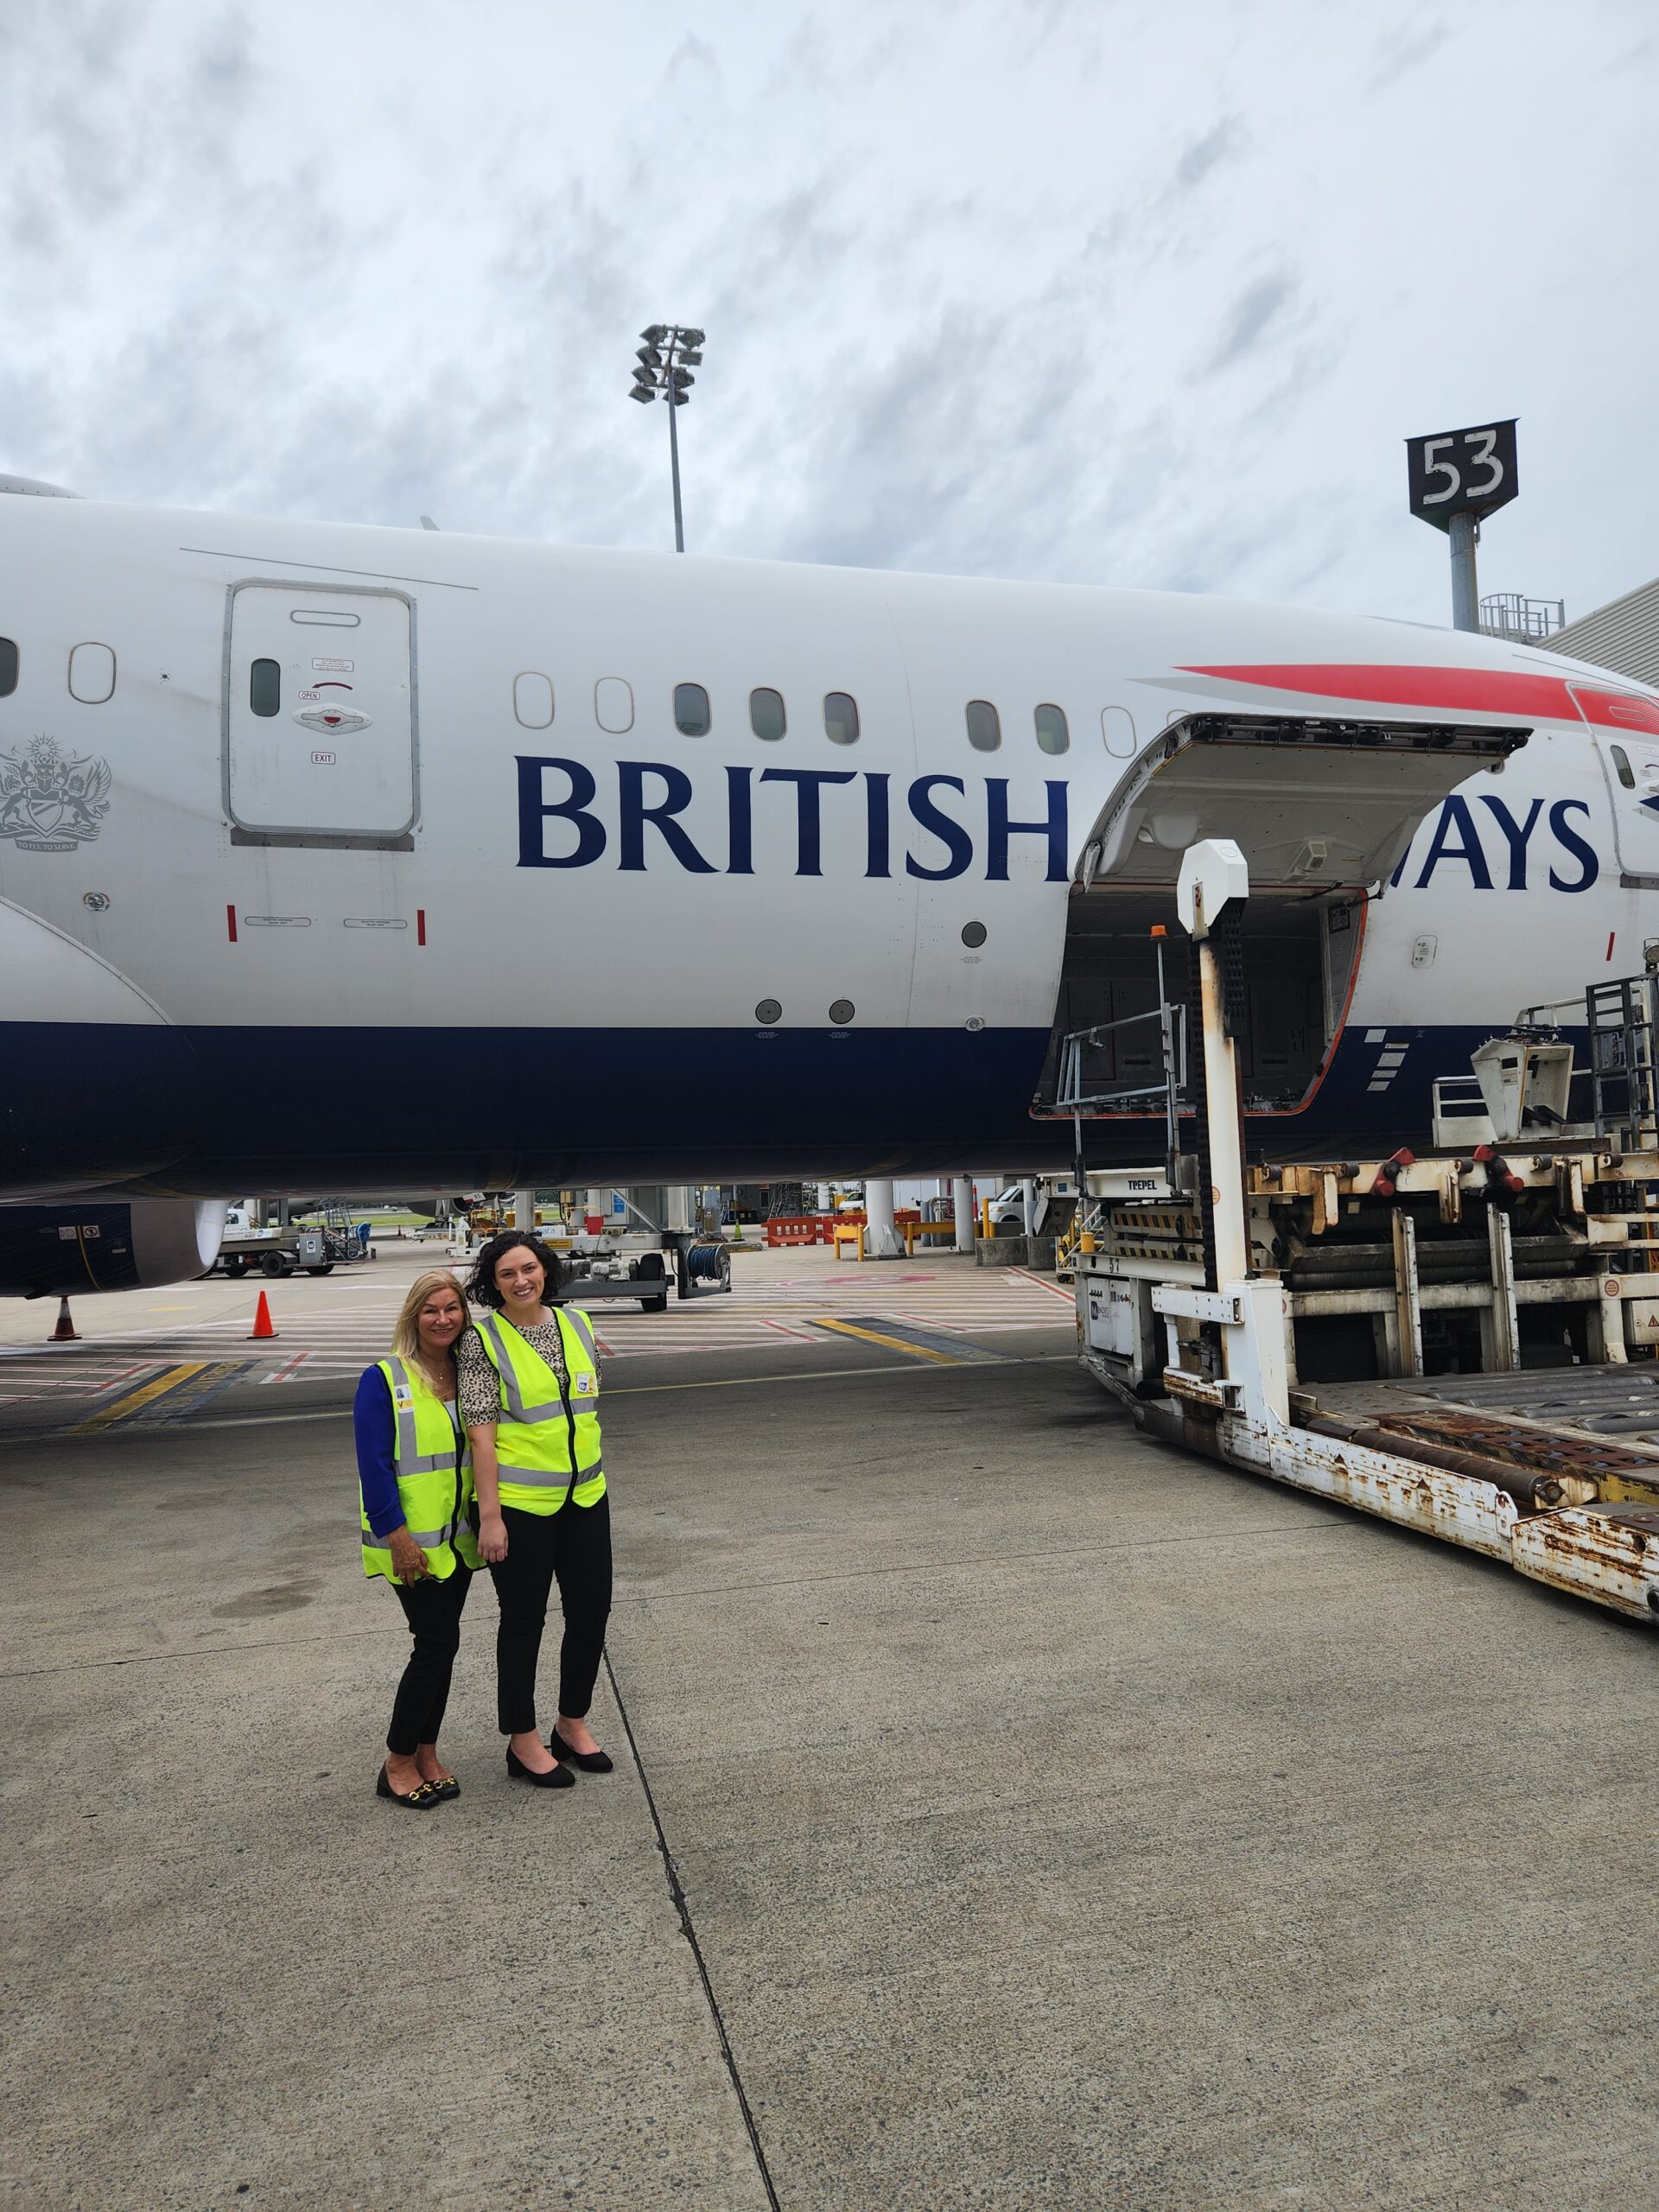 uLaunch - photo of two workers beside a British airways plane with the cargo hold open